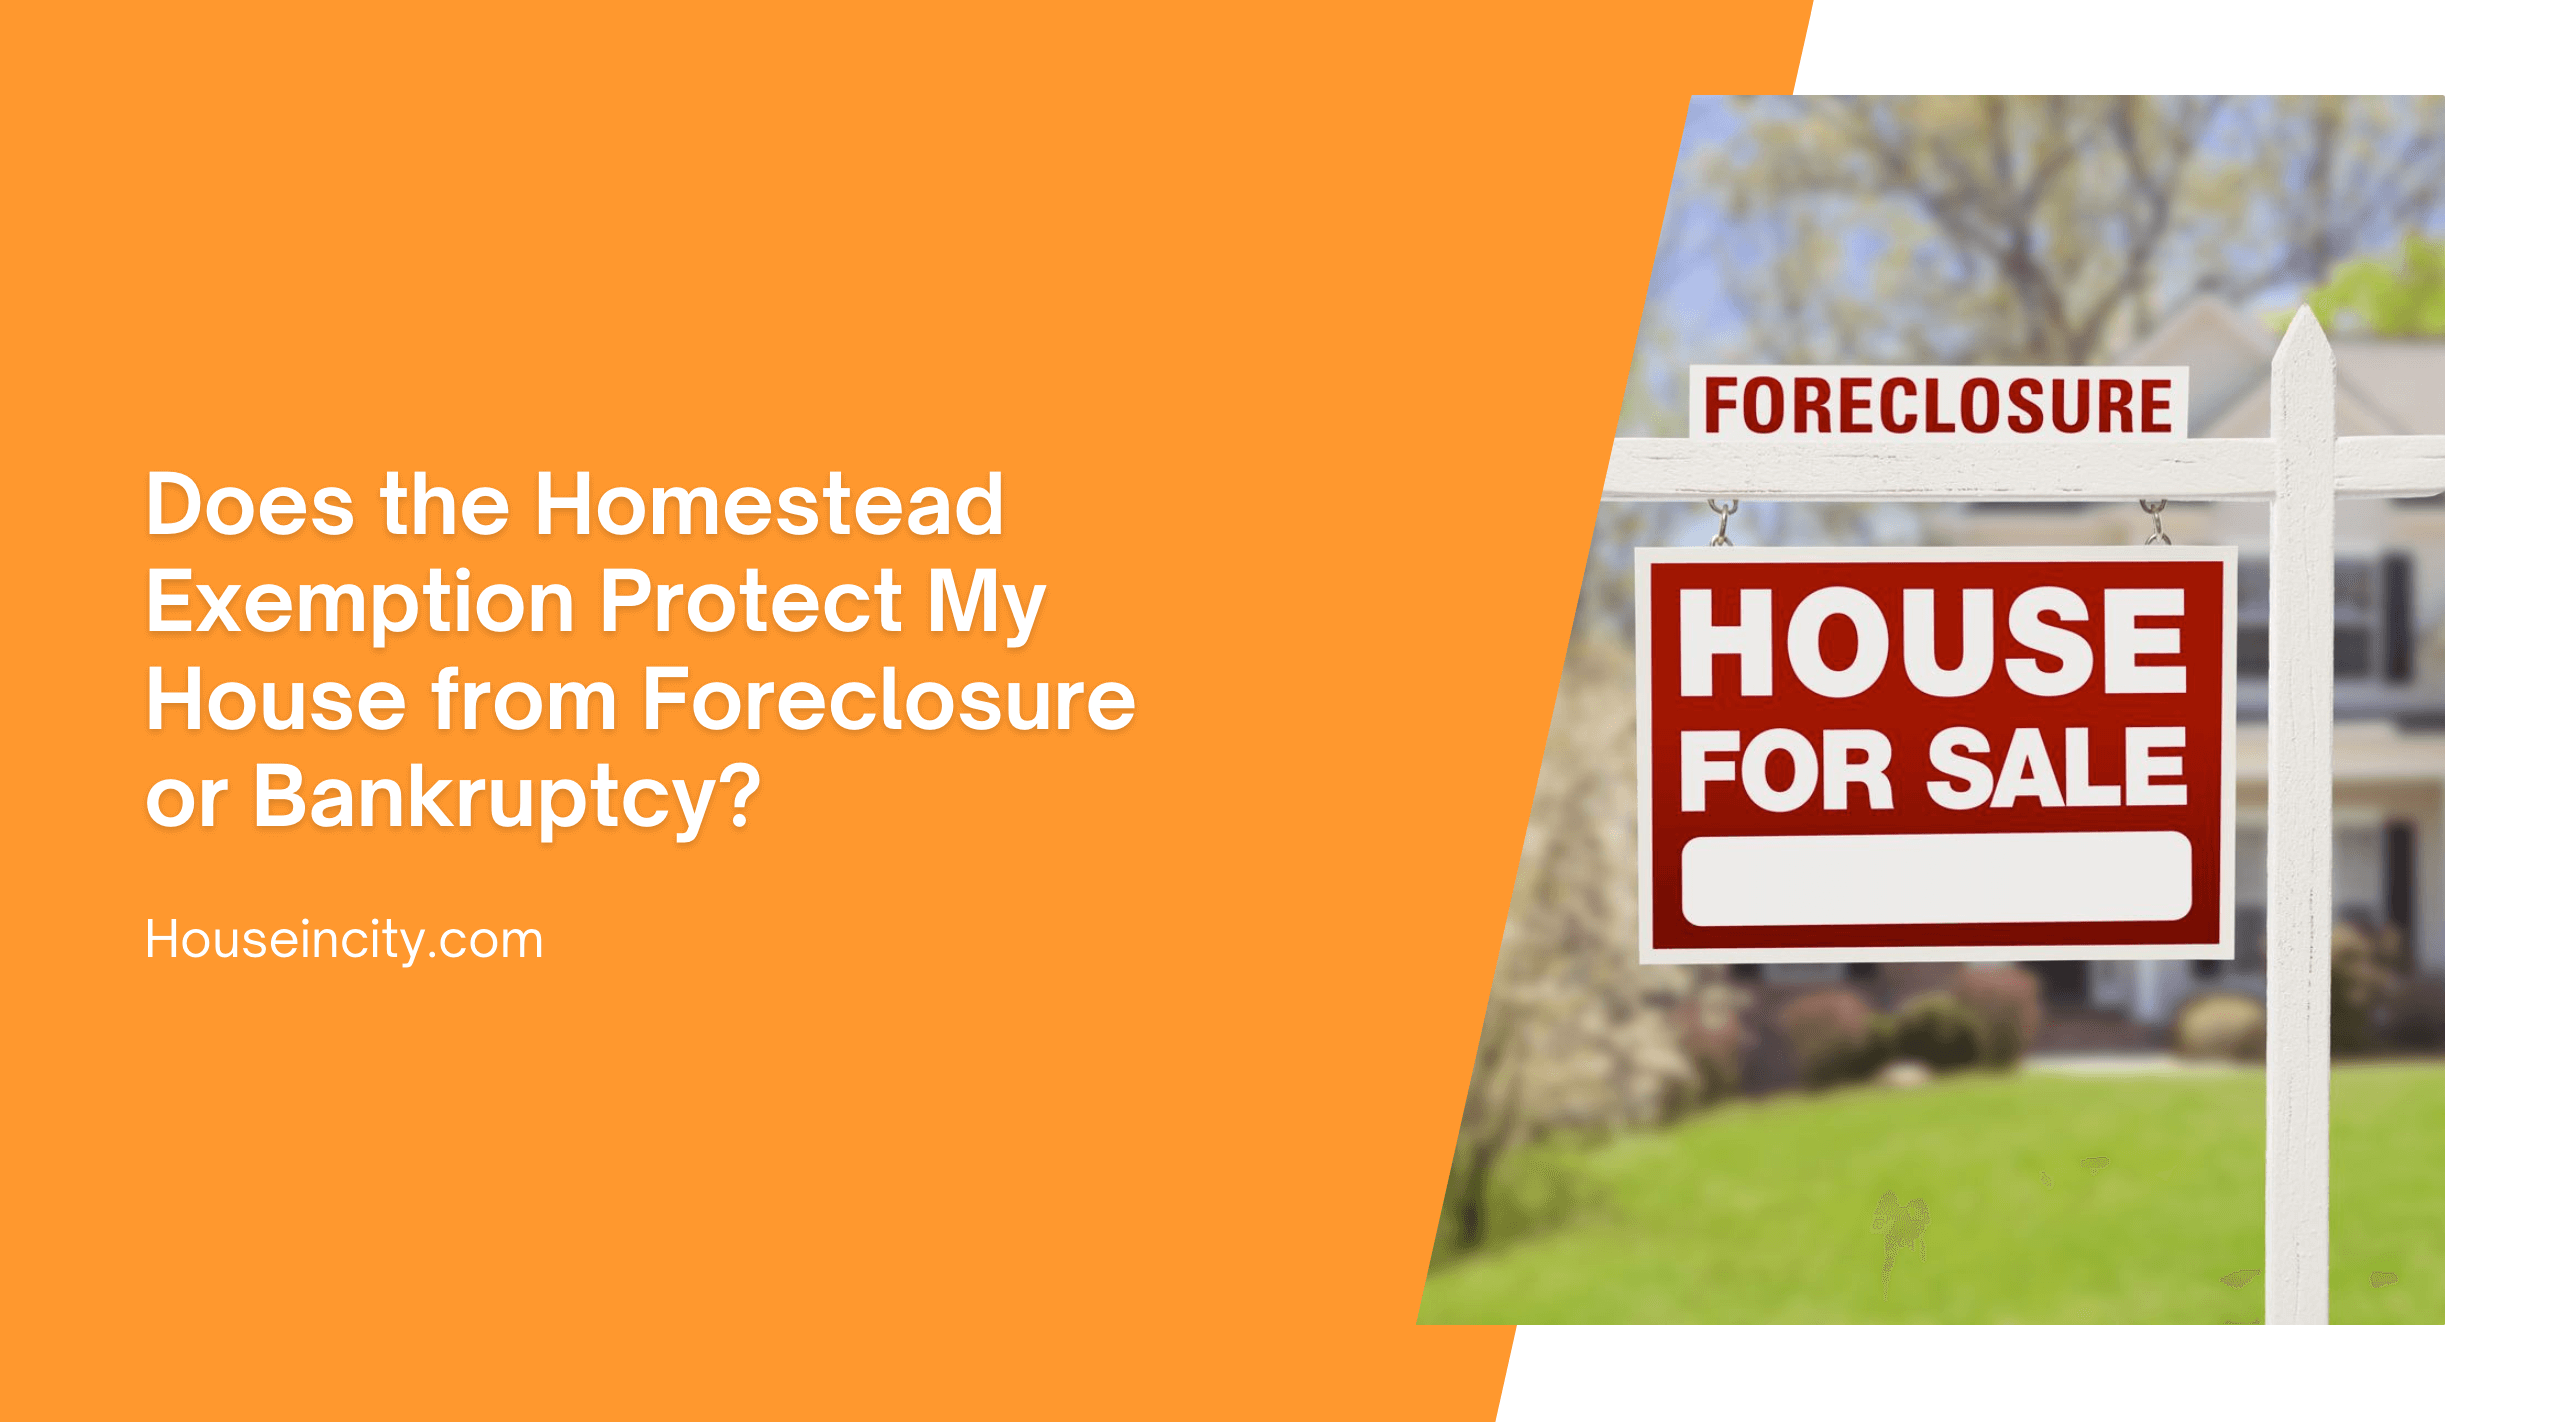 Does the Homestead Exemption Protect My House from Foreclosure or Bankruptcy?